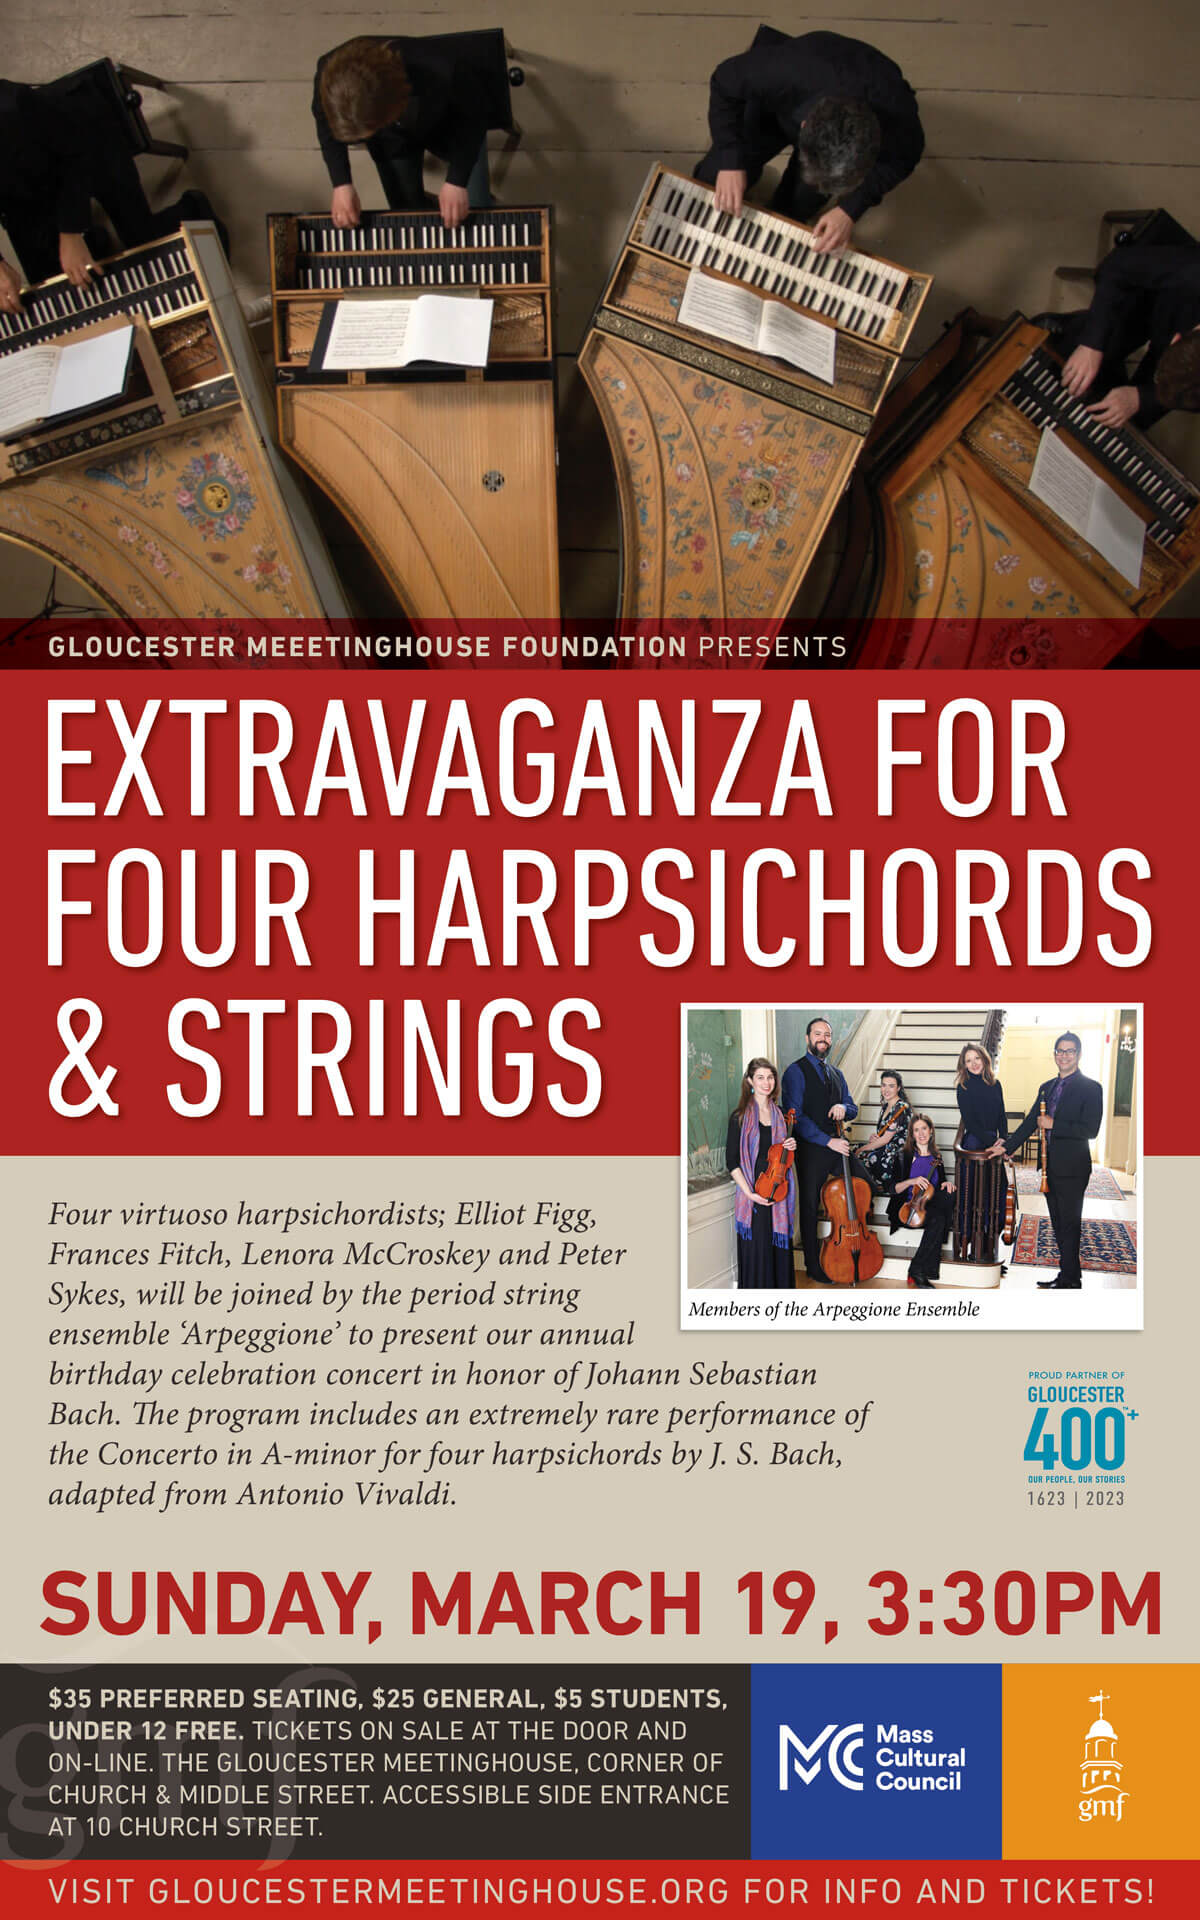 Extravaganza For Four Harpsichords & Strings